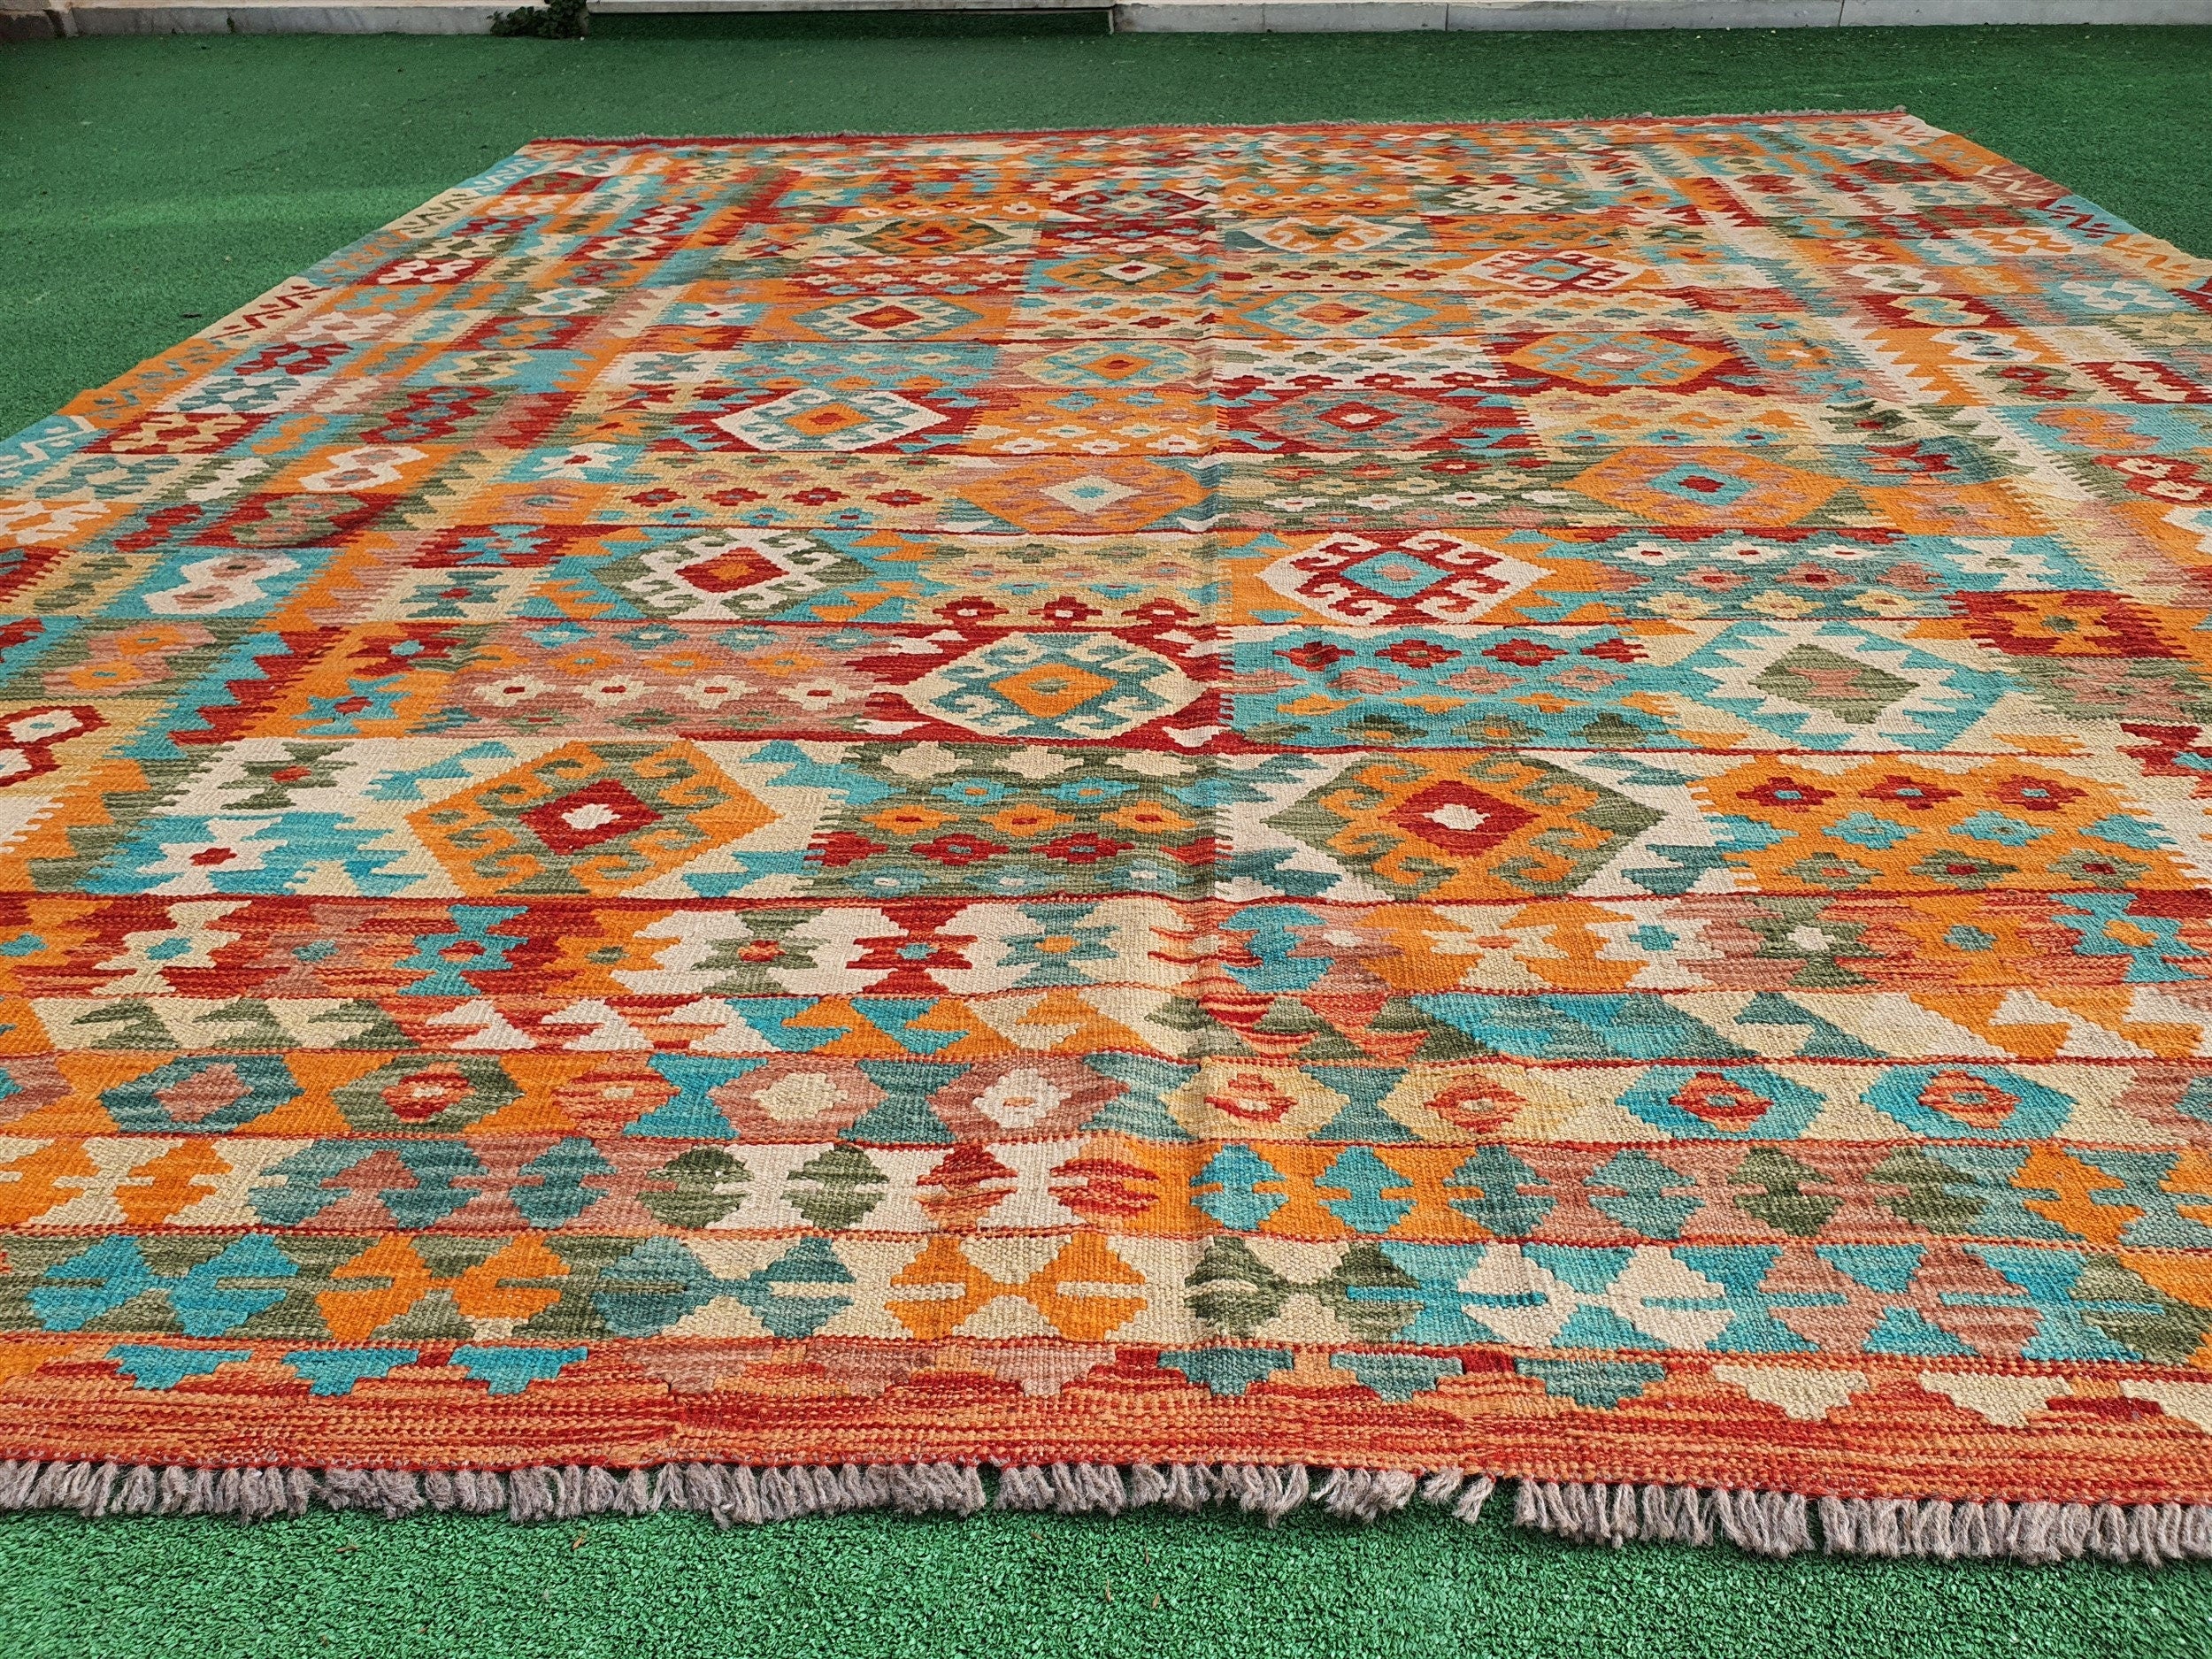 Afghan Kilim Rug, 9 x 8 ft Very Large Rust Red Blue and Off White Turkish Contemporary Kilim